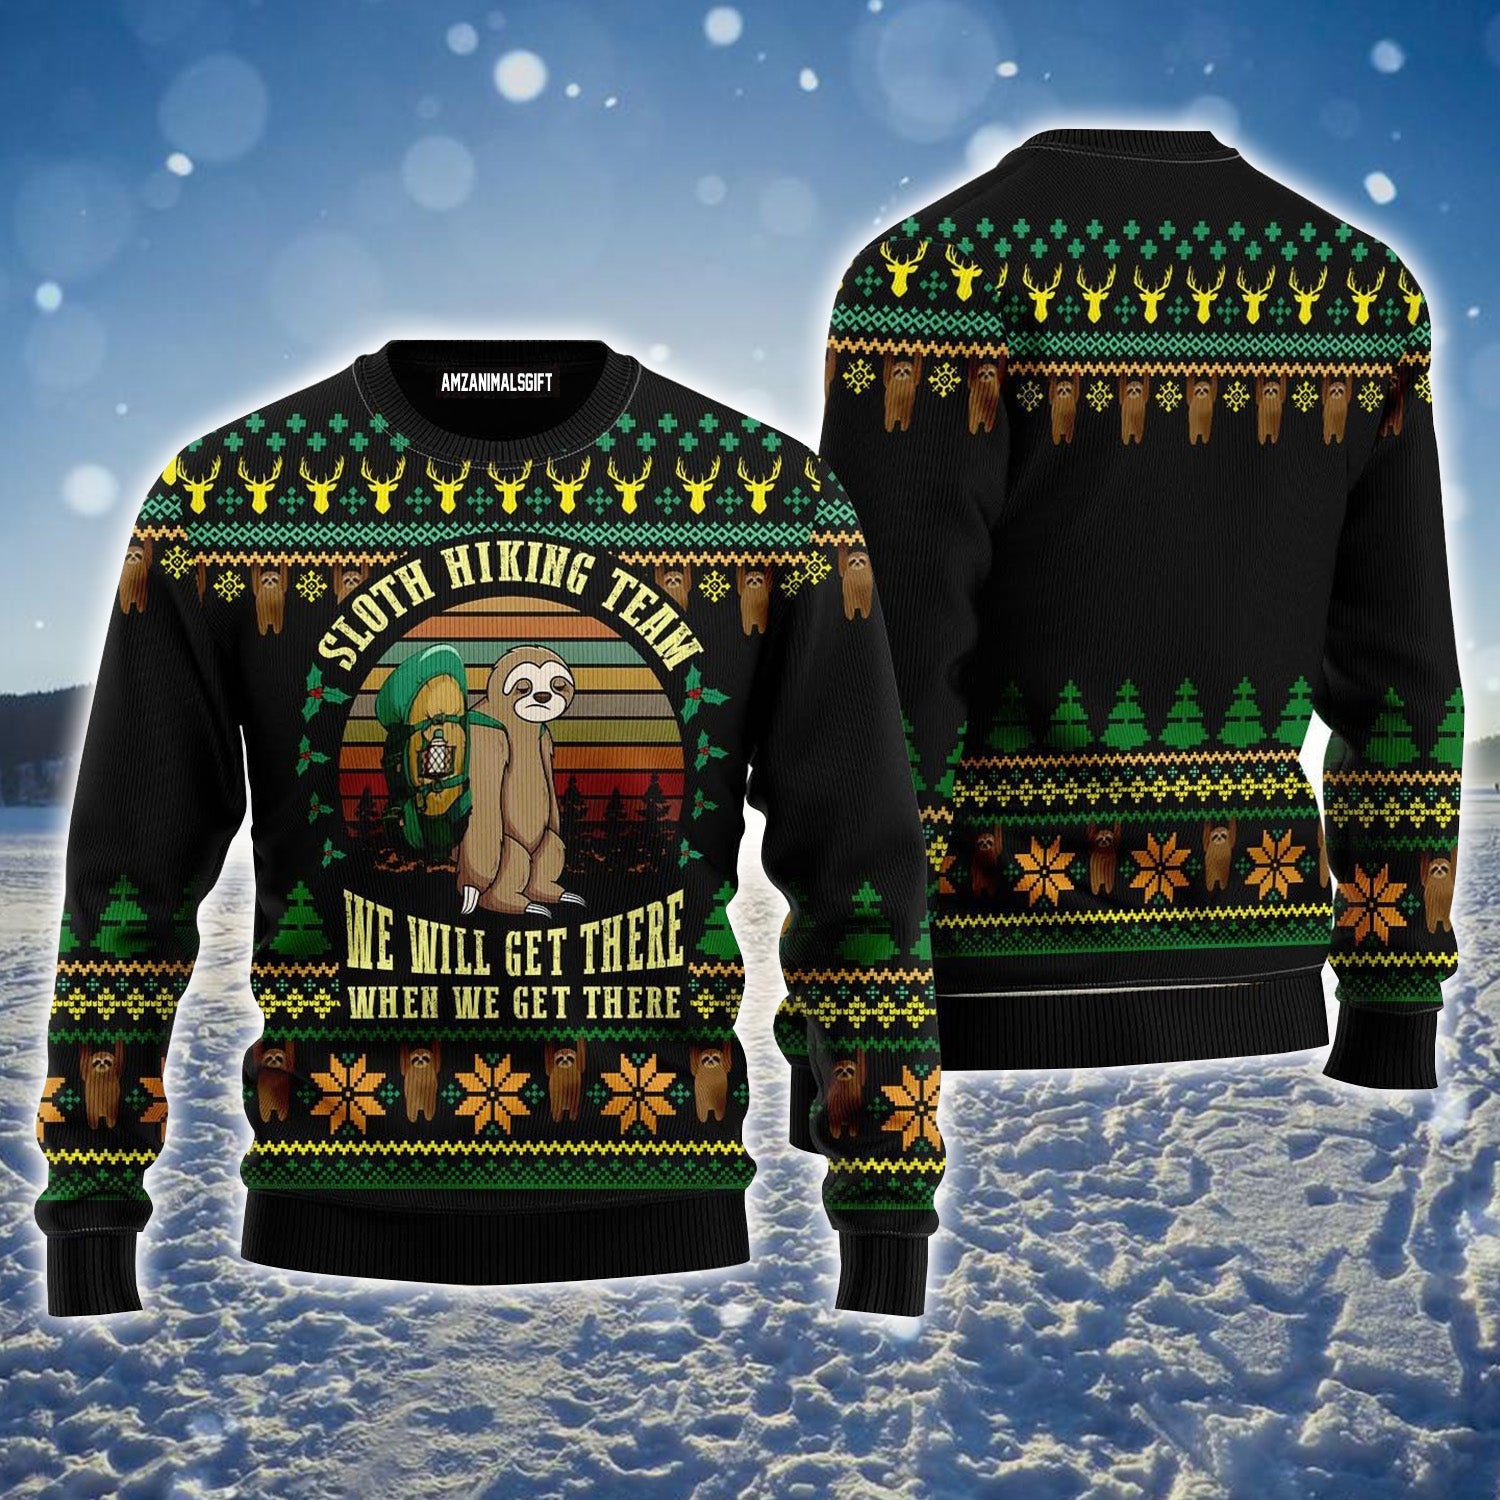 Sloth Hiking Team Ugly Sweater For Men & Women, Perfect Outfit For Christmas New Year Autumn Winter